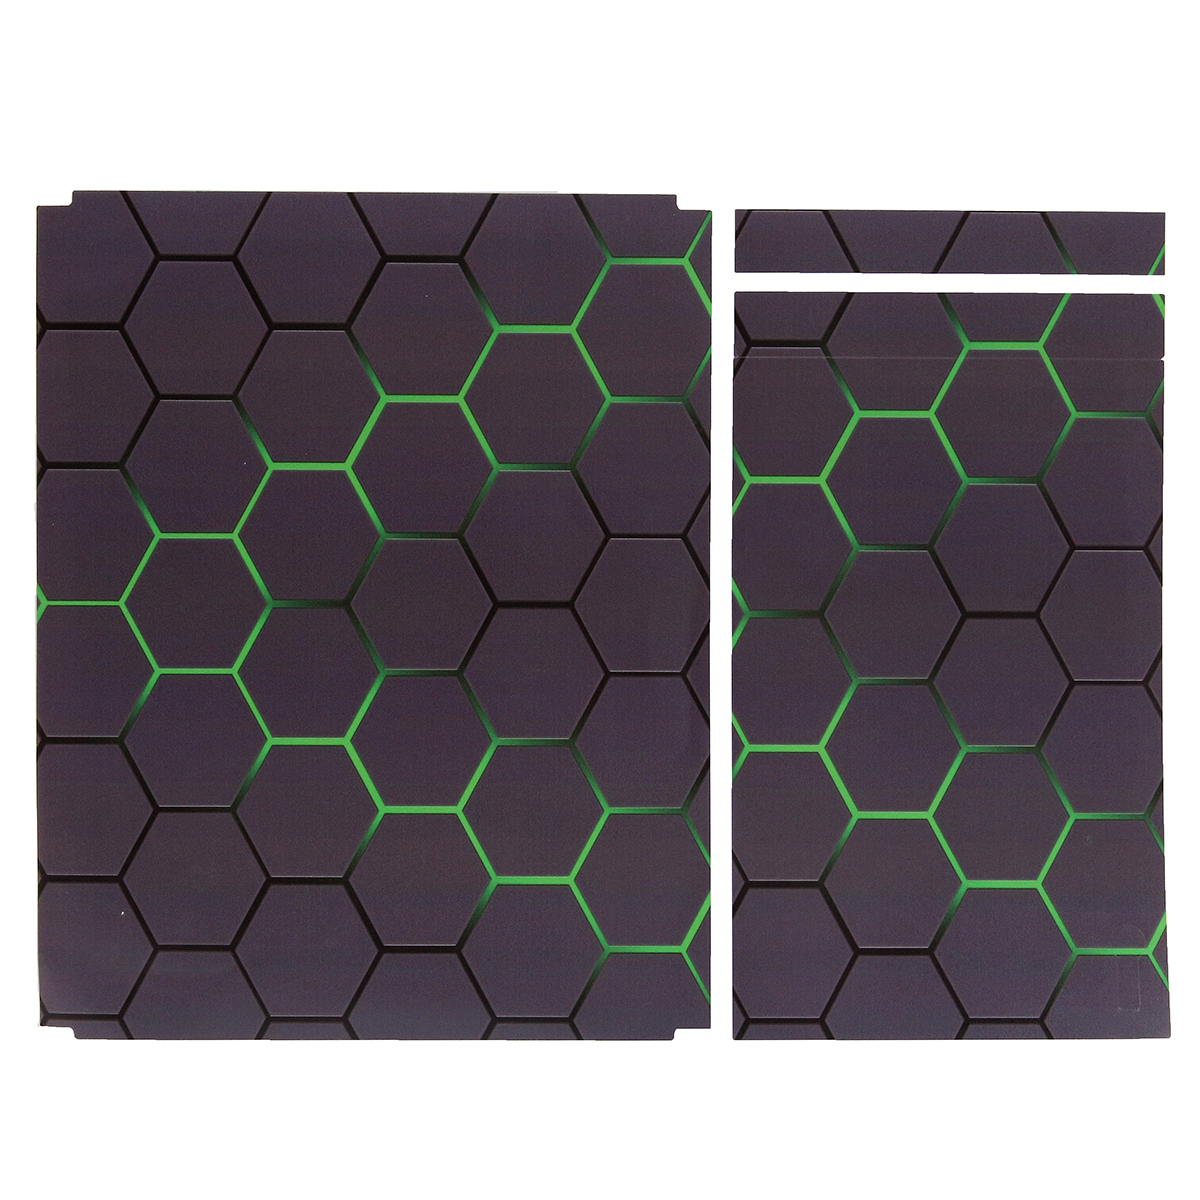 Green Grid Vinyl Decal Skin Stickers Cover for Xbox One S Game Console&2 Controllers 30